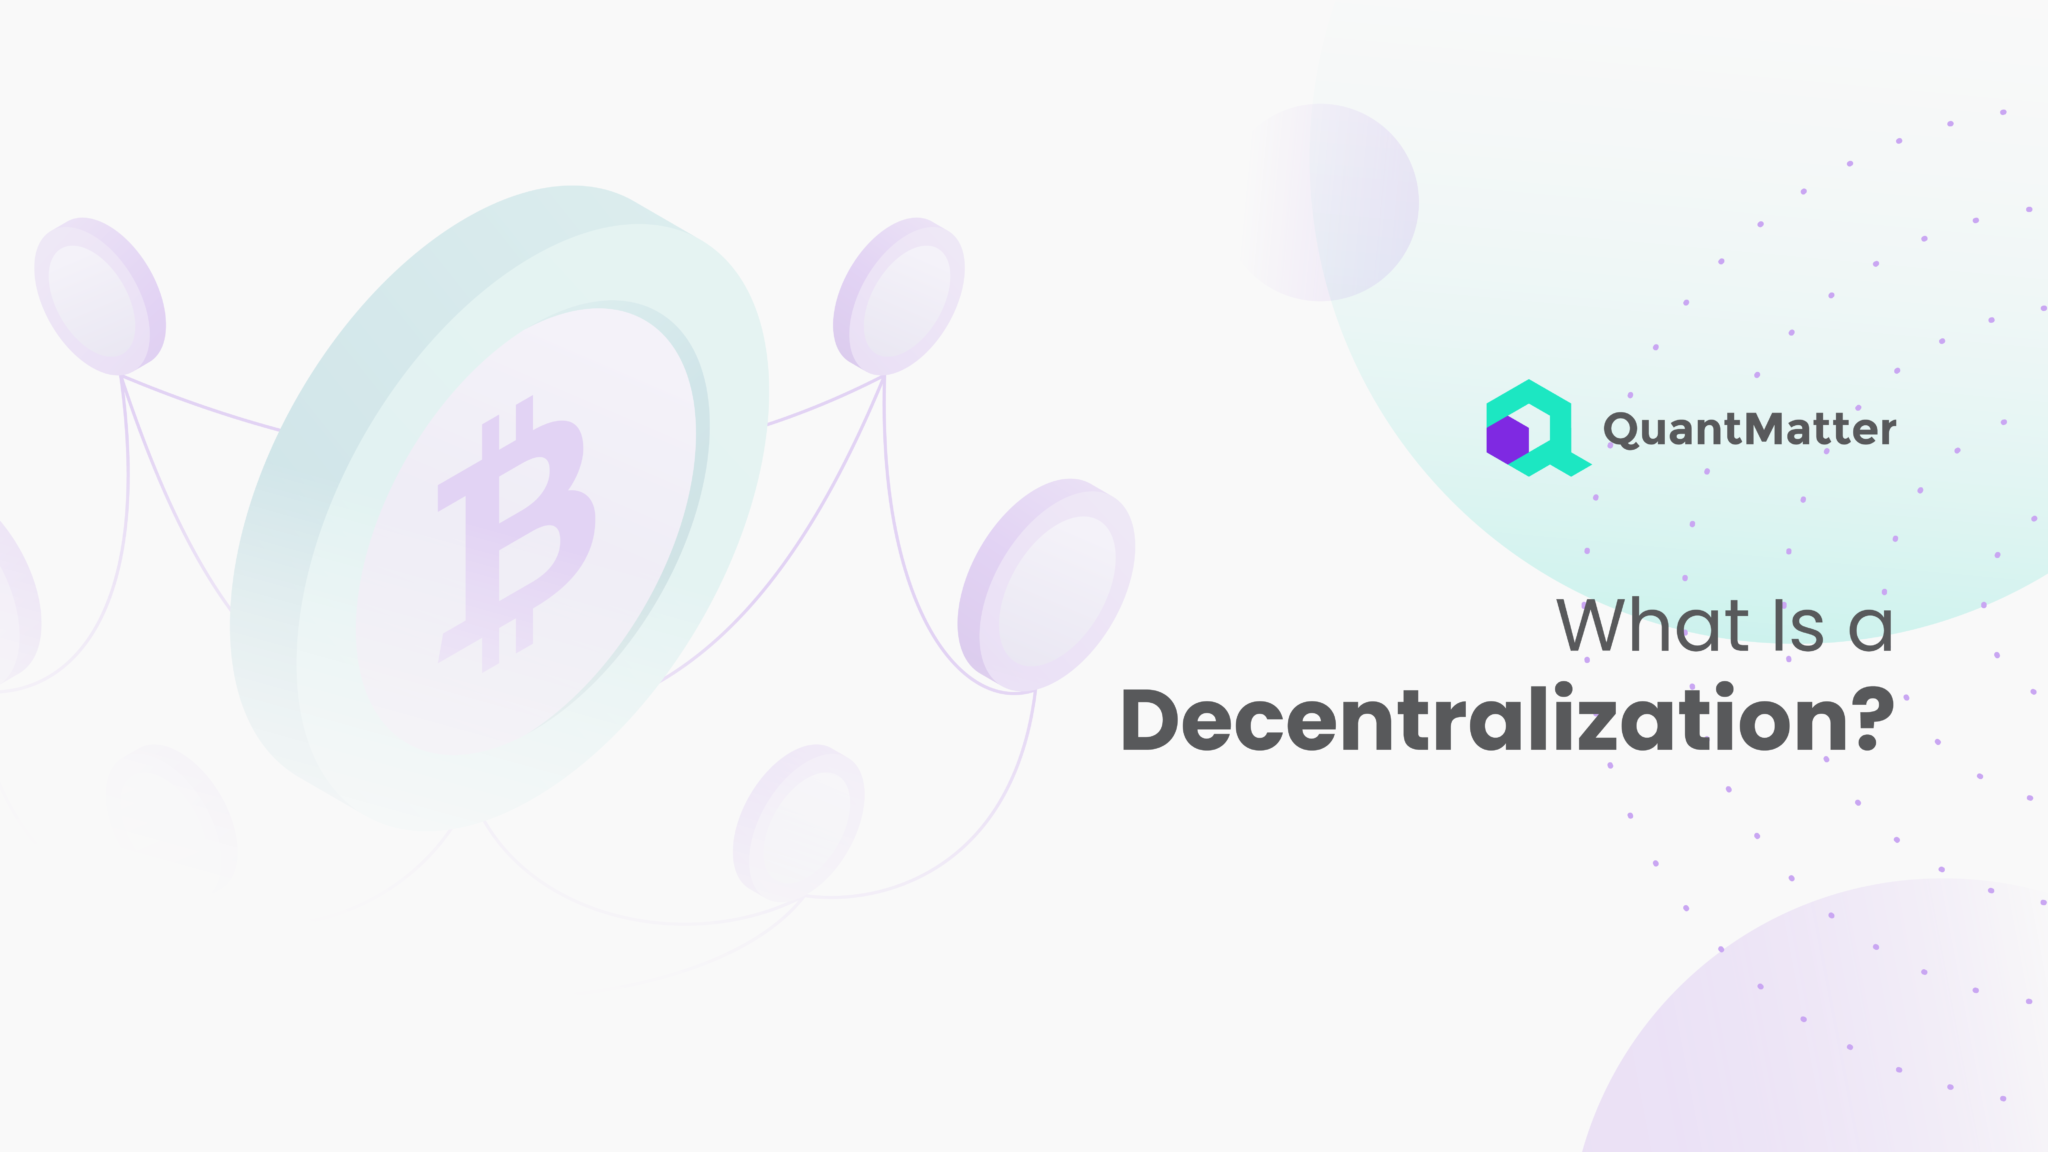 What is Decentralization?